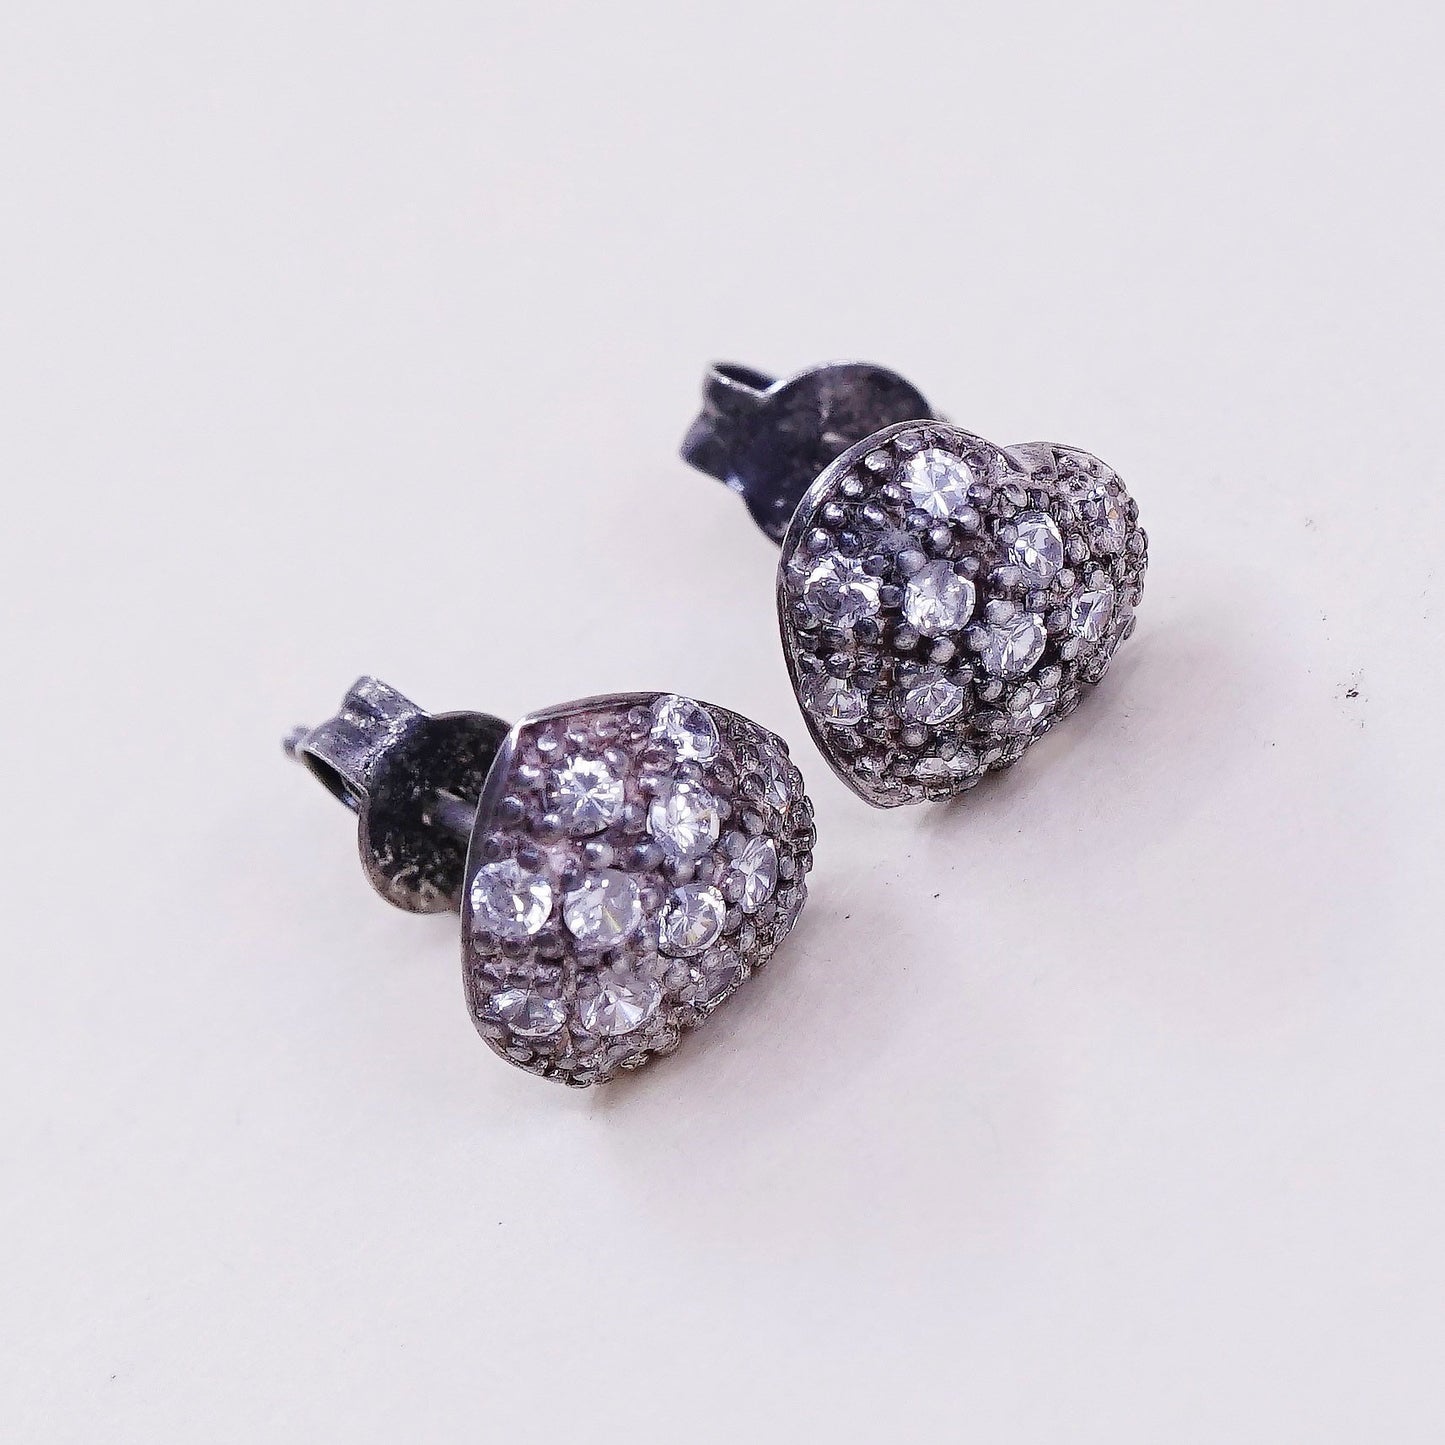 vtg sterling silver handmade earrings, 925 heart shaped studs with cluster cz